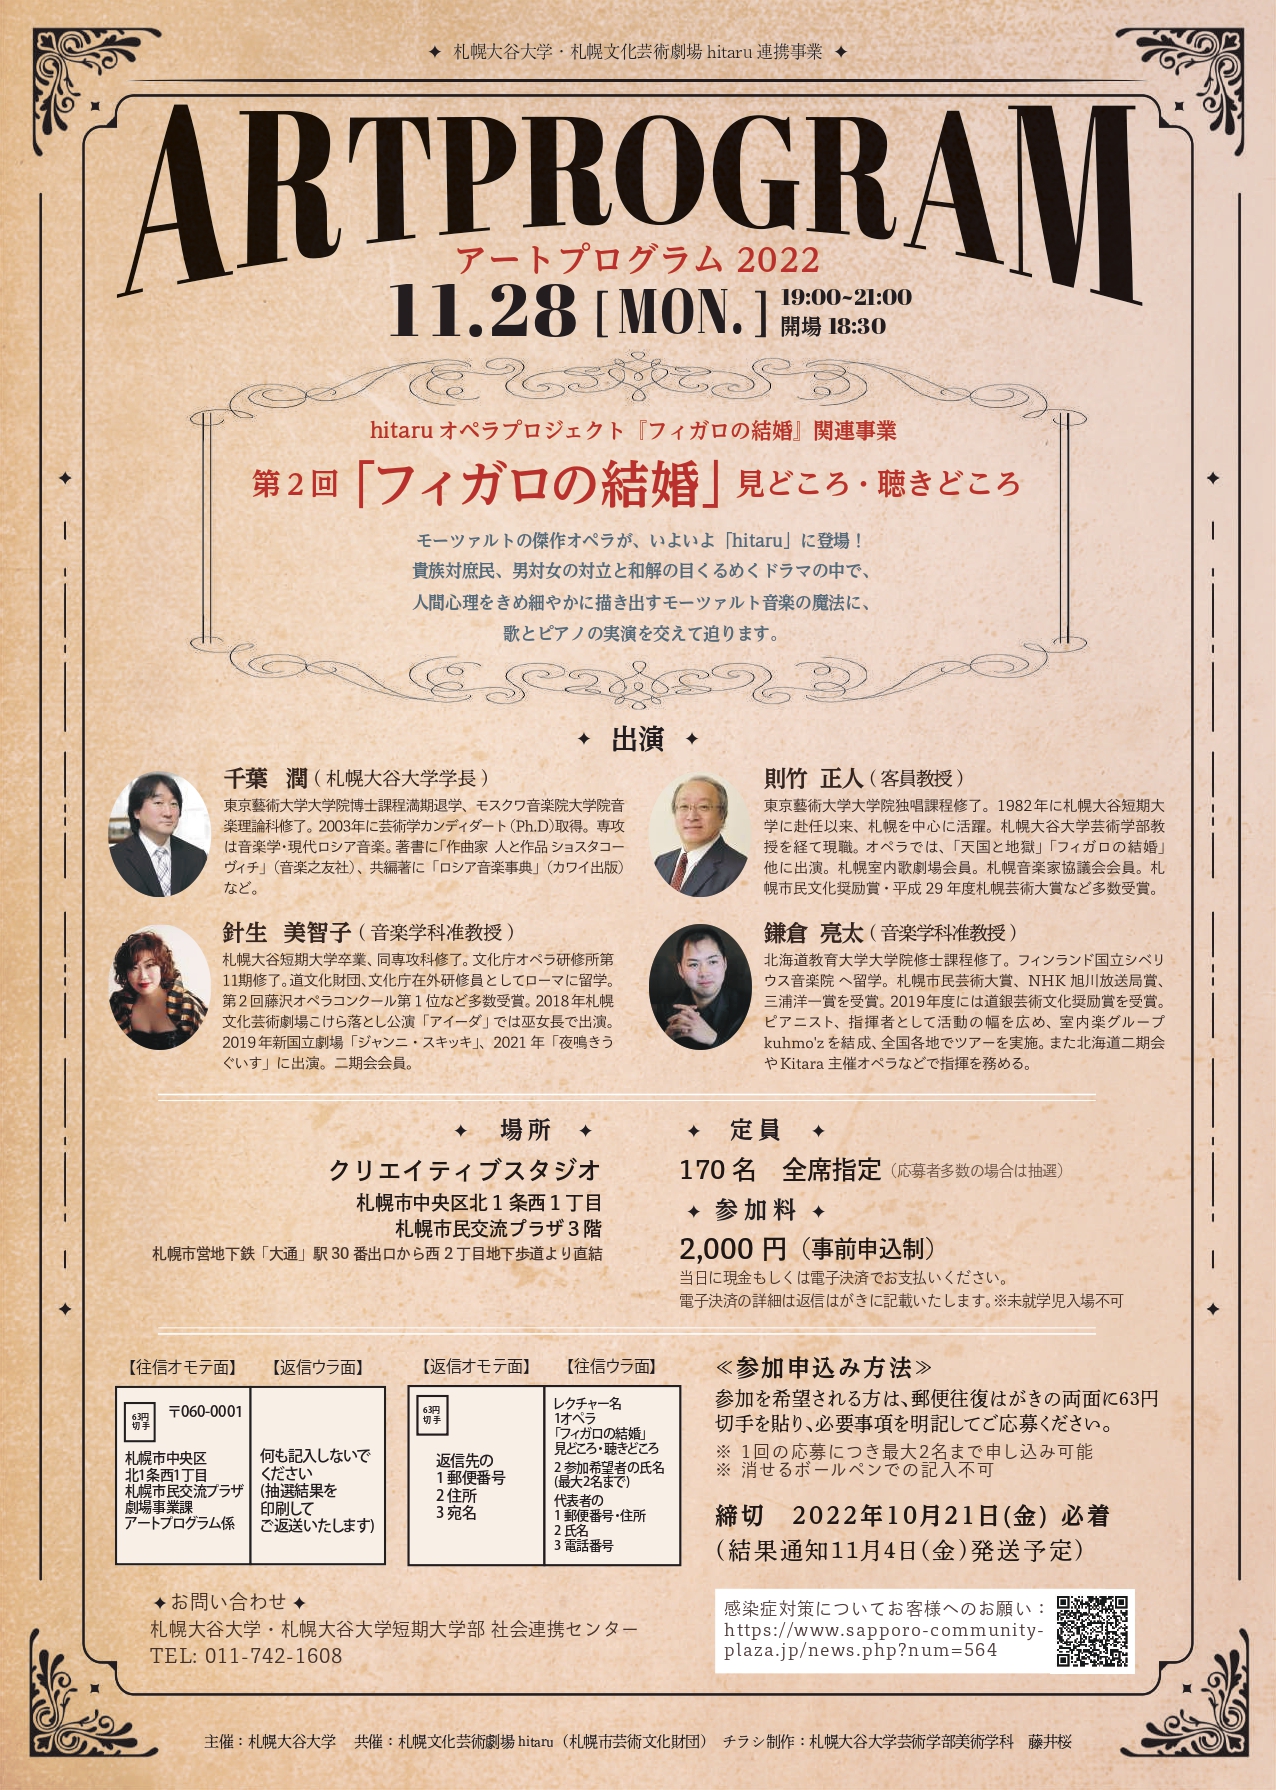 Sapporo Otani University & hitaru Joint Project Art Program 2022 No. 2 Music and Performance Highlights from the Opera “The Marriage of Figaro”image